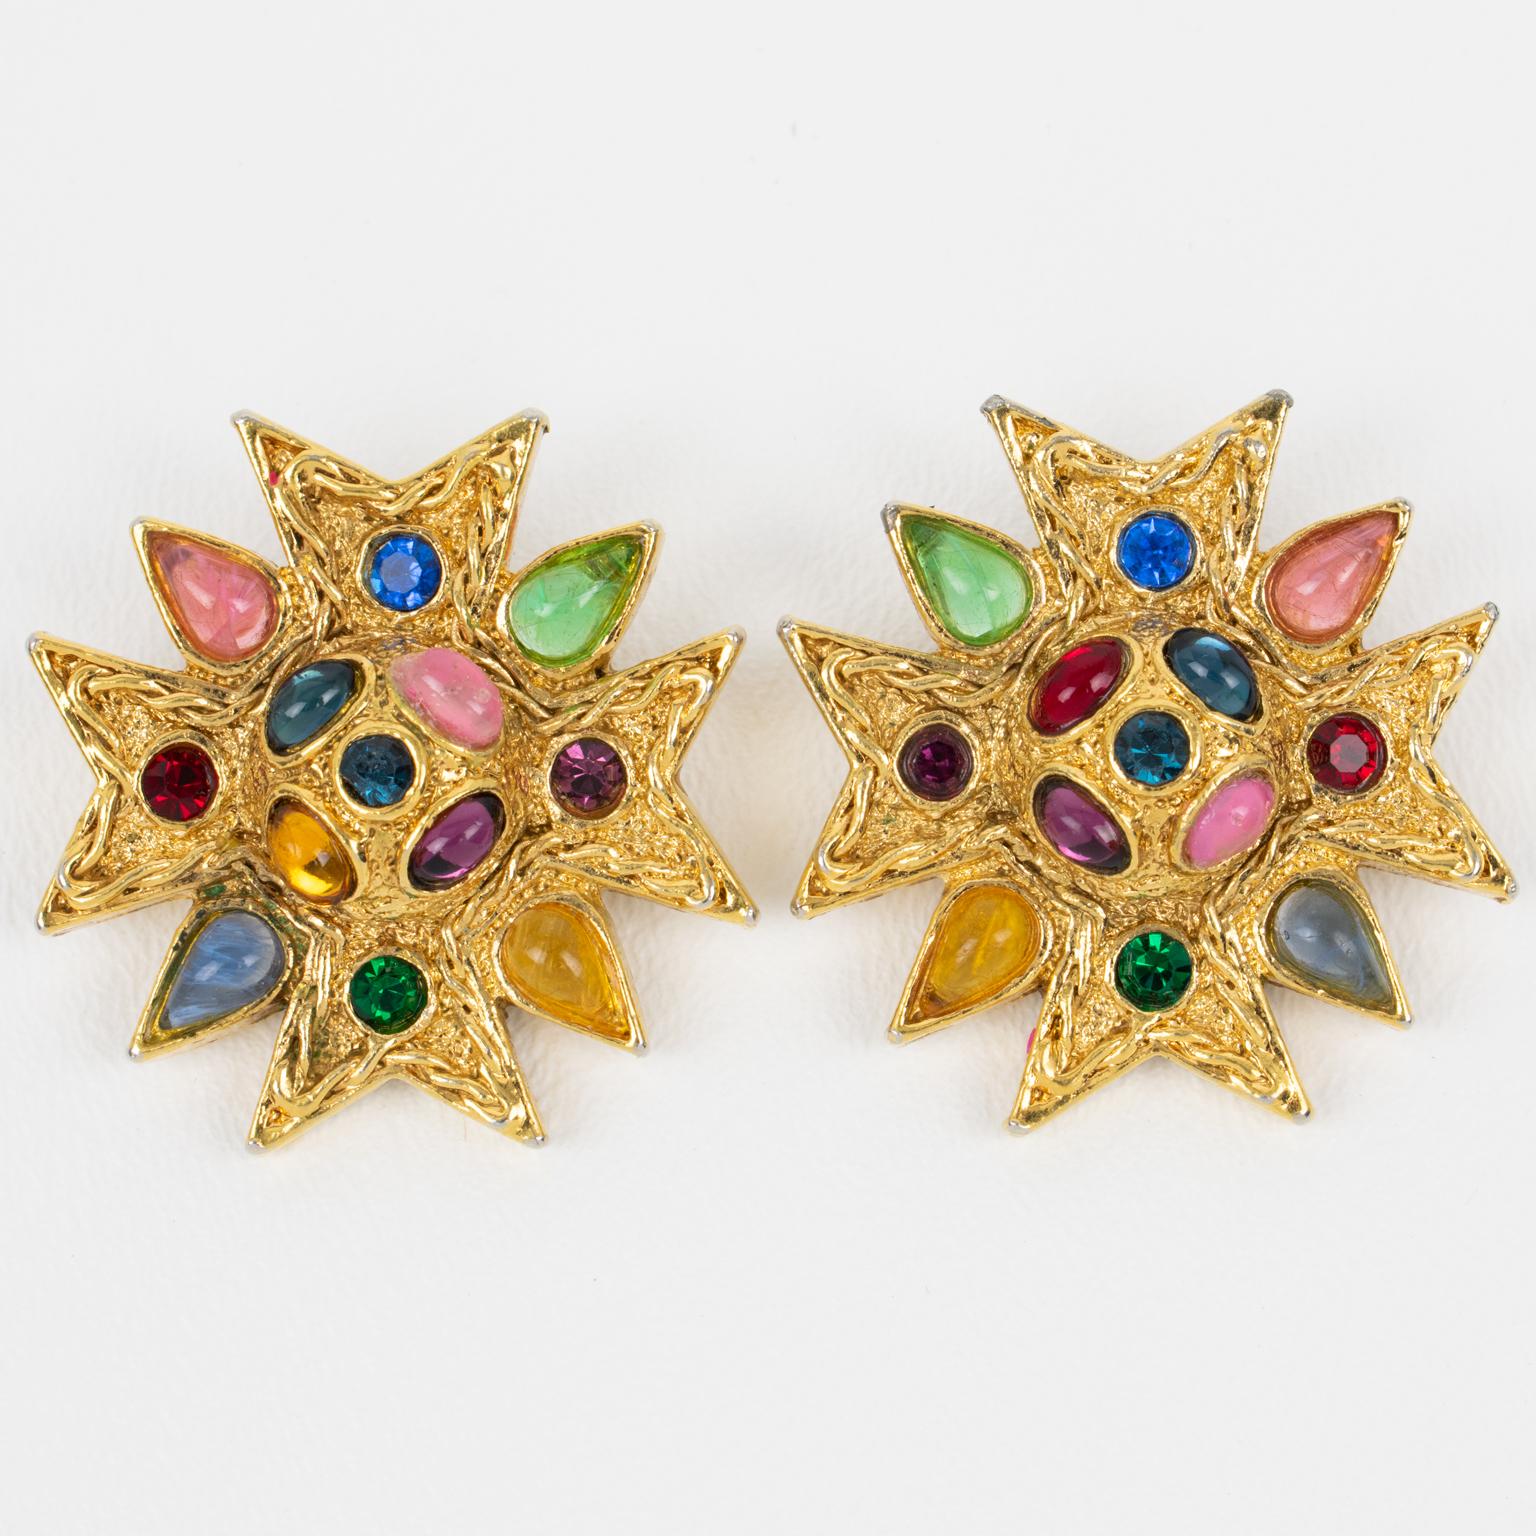 Modern Guy Laroche Gilt Metal and Multicolor Jeweled Clip Earrings For Sale